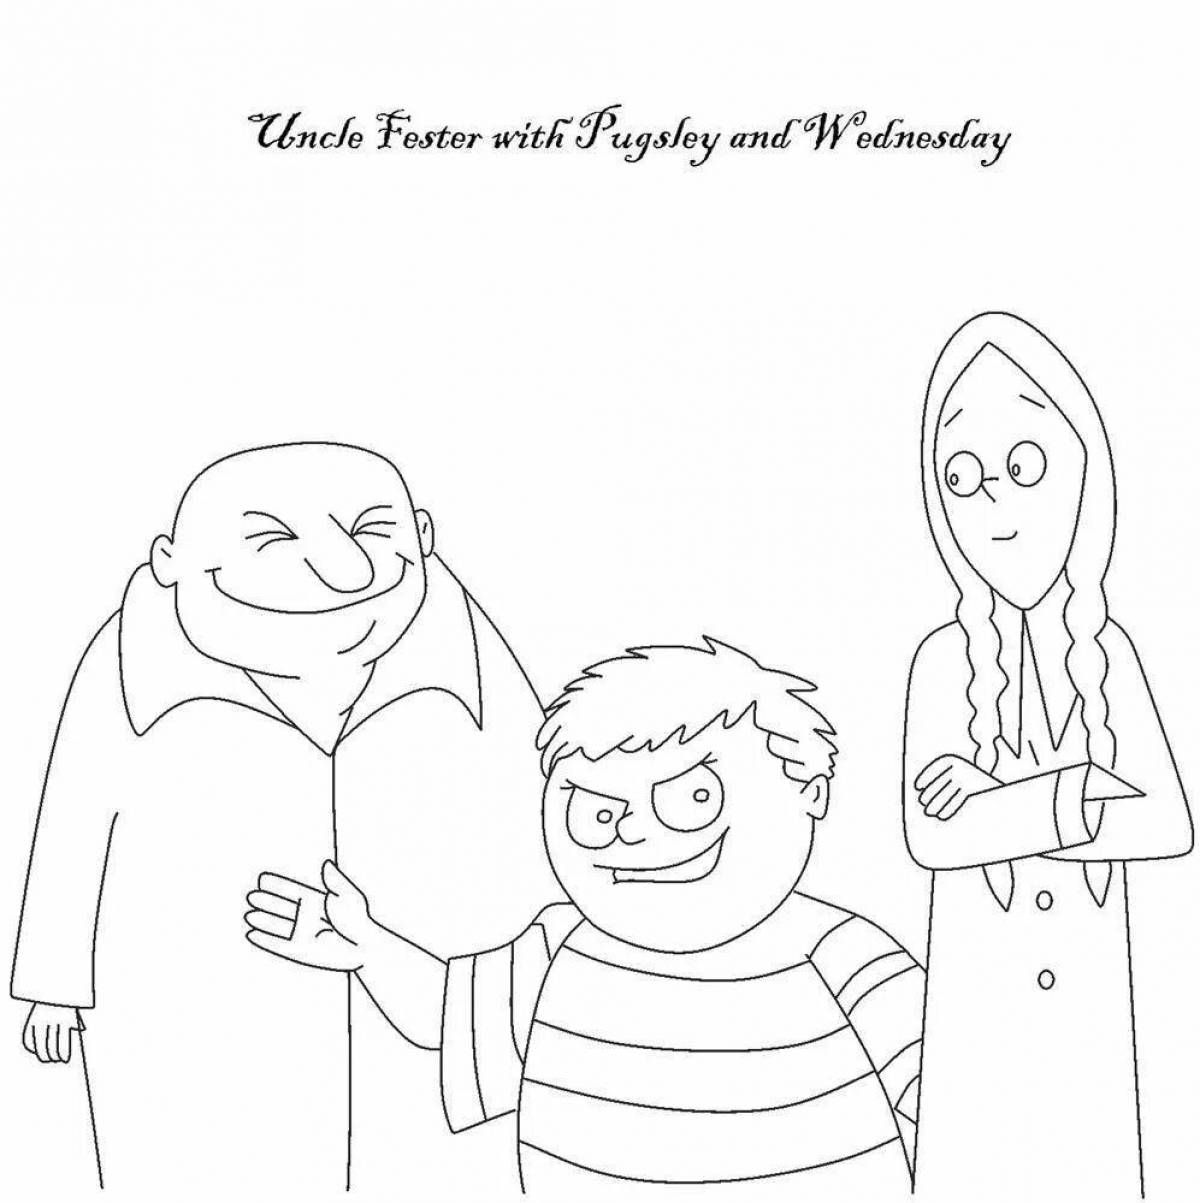 Lovely adams family coloring book